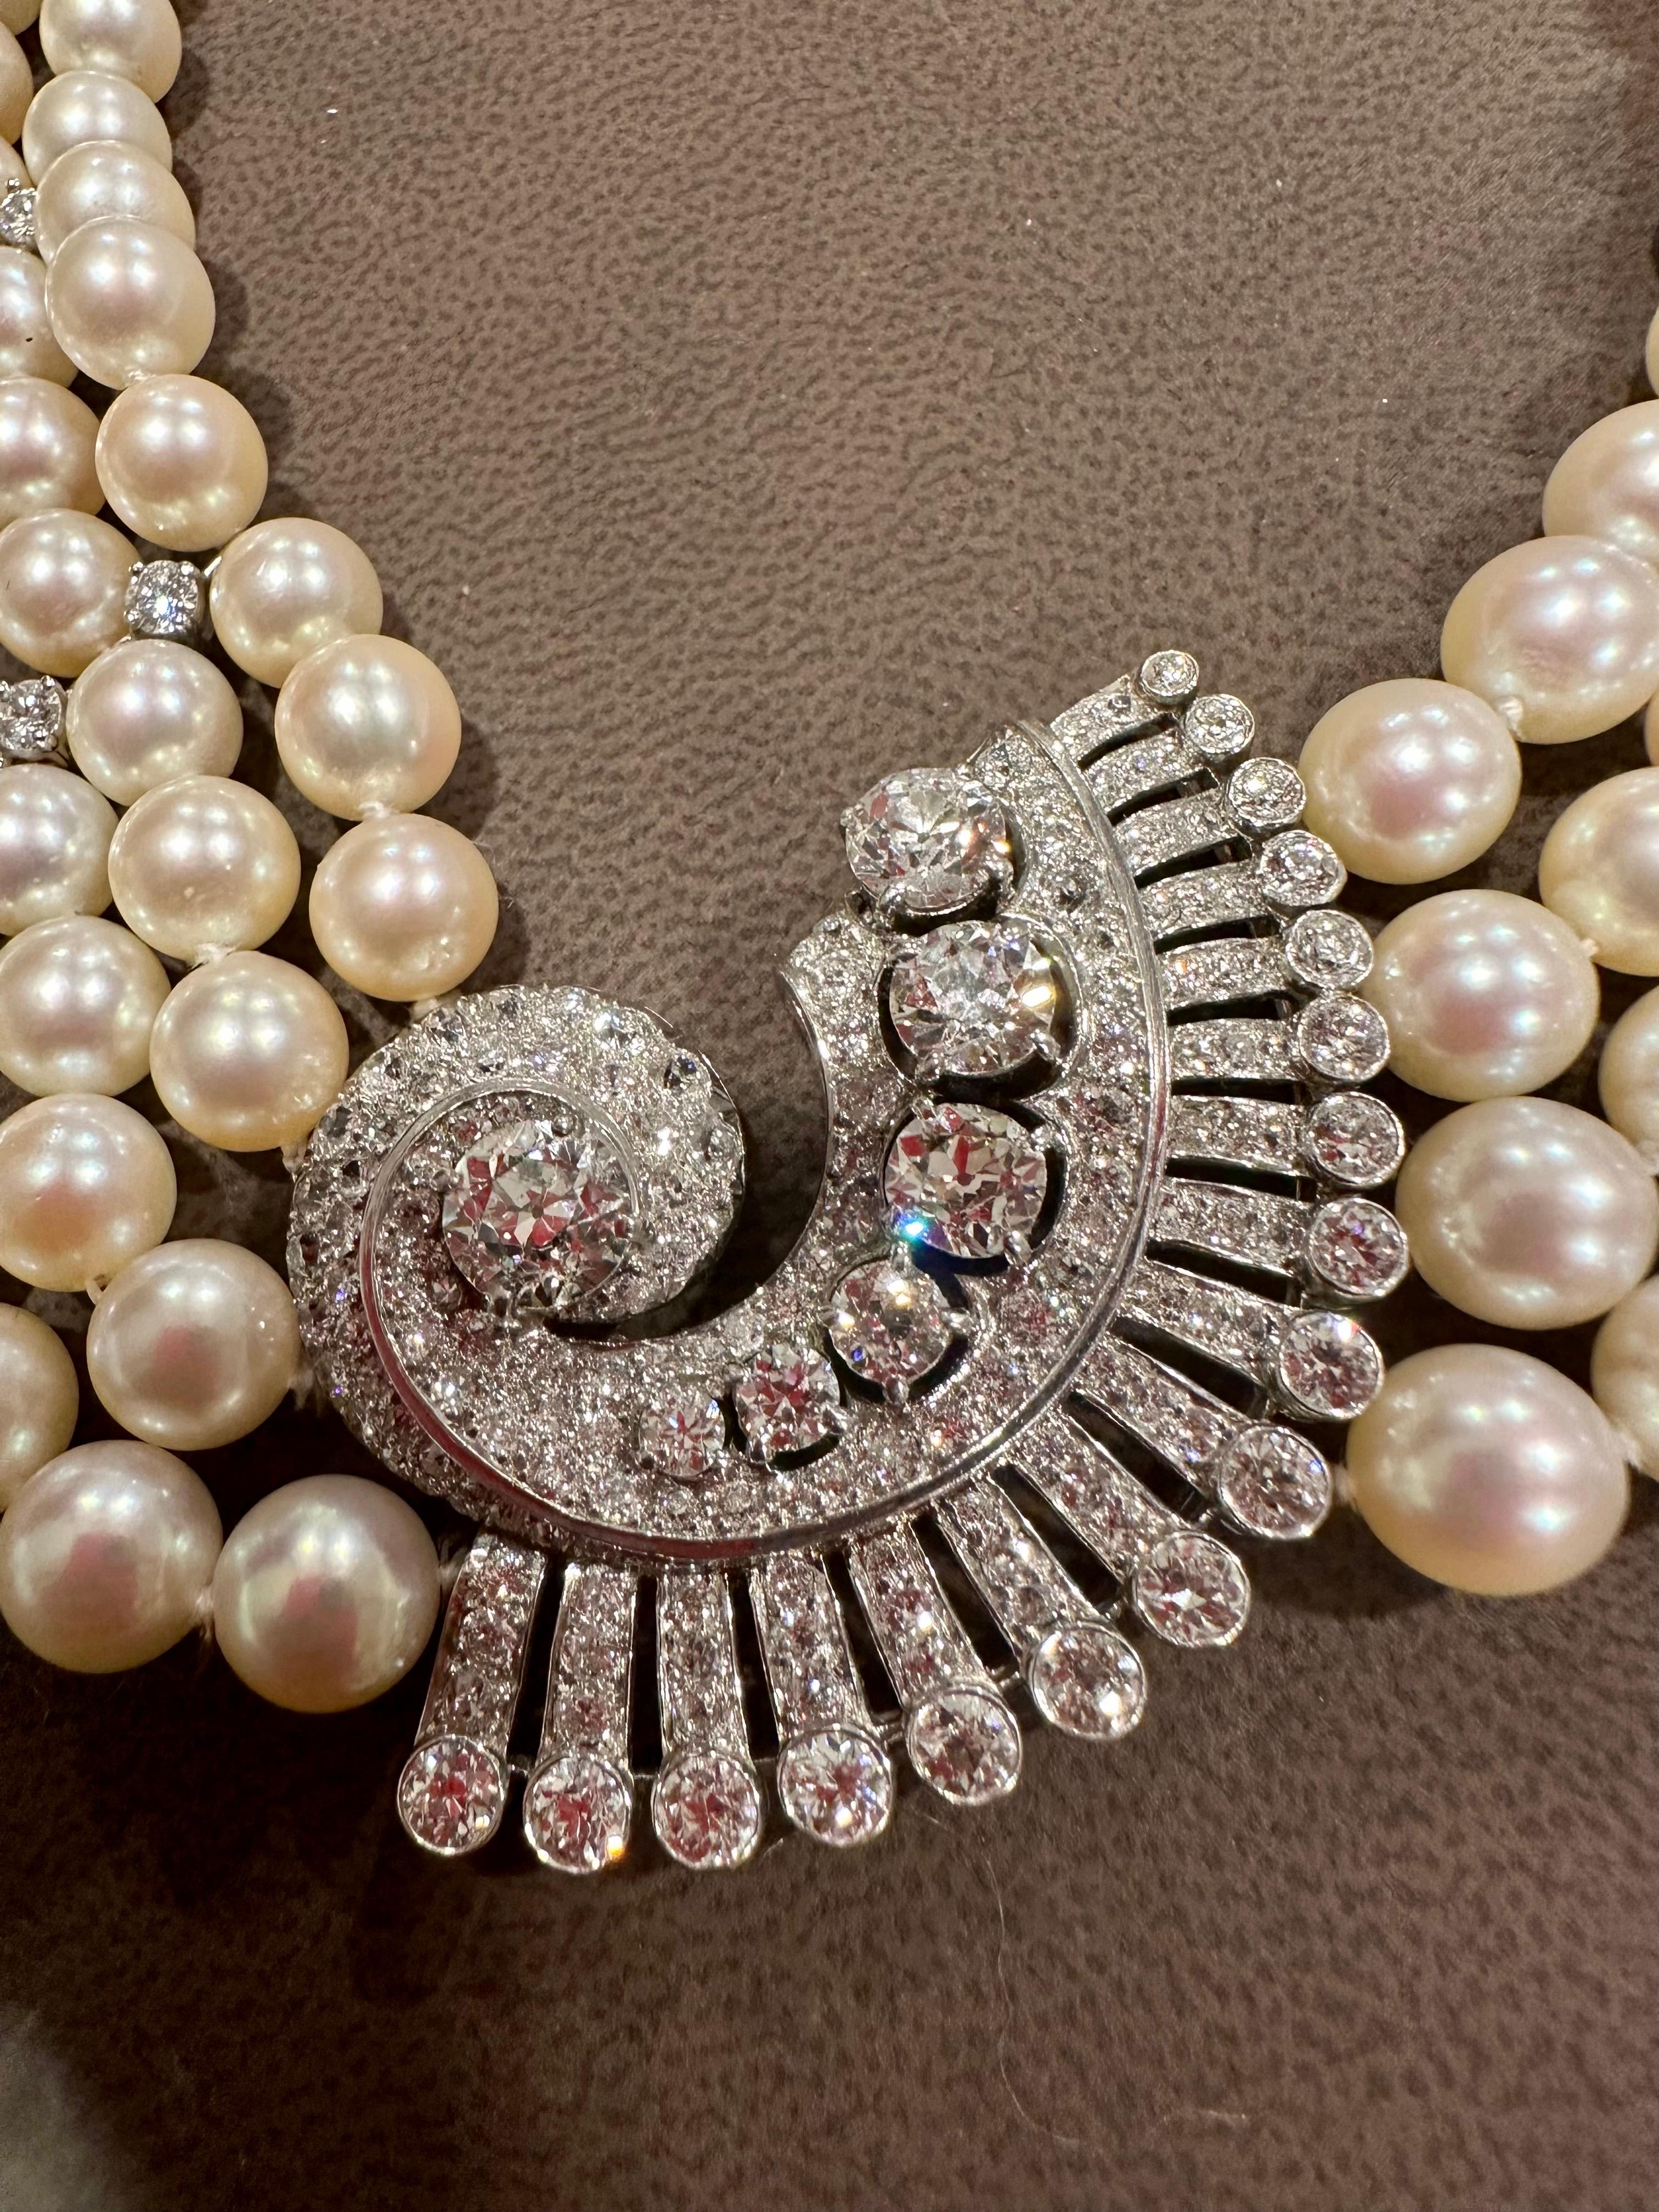 Round Cut Antique 14.5ct Diamond Center Brooch  with Pearls Necklace in Platinum Bridal For Sale